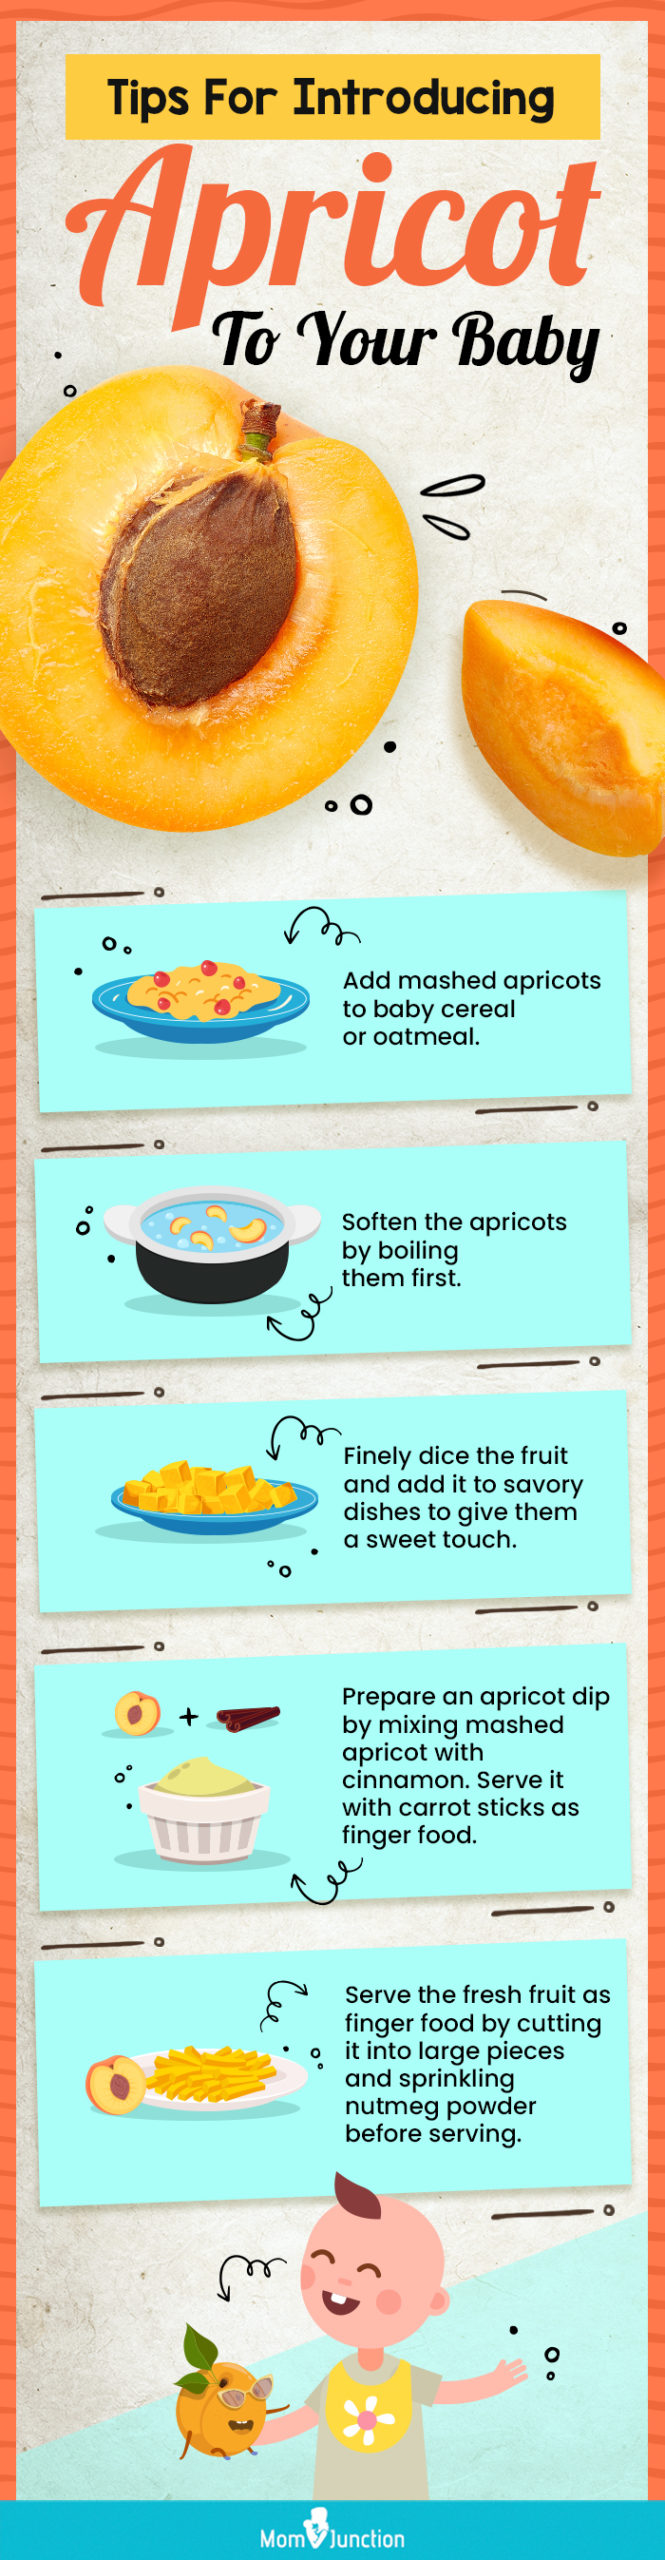 tips for introducing apricot to your baby (infographic)